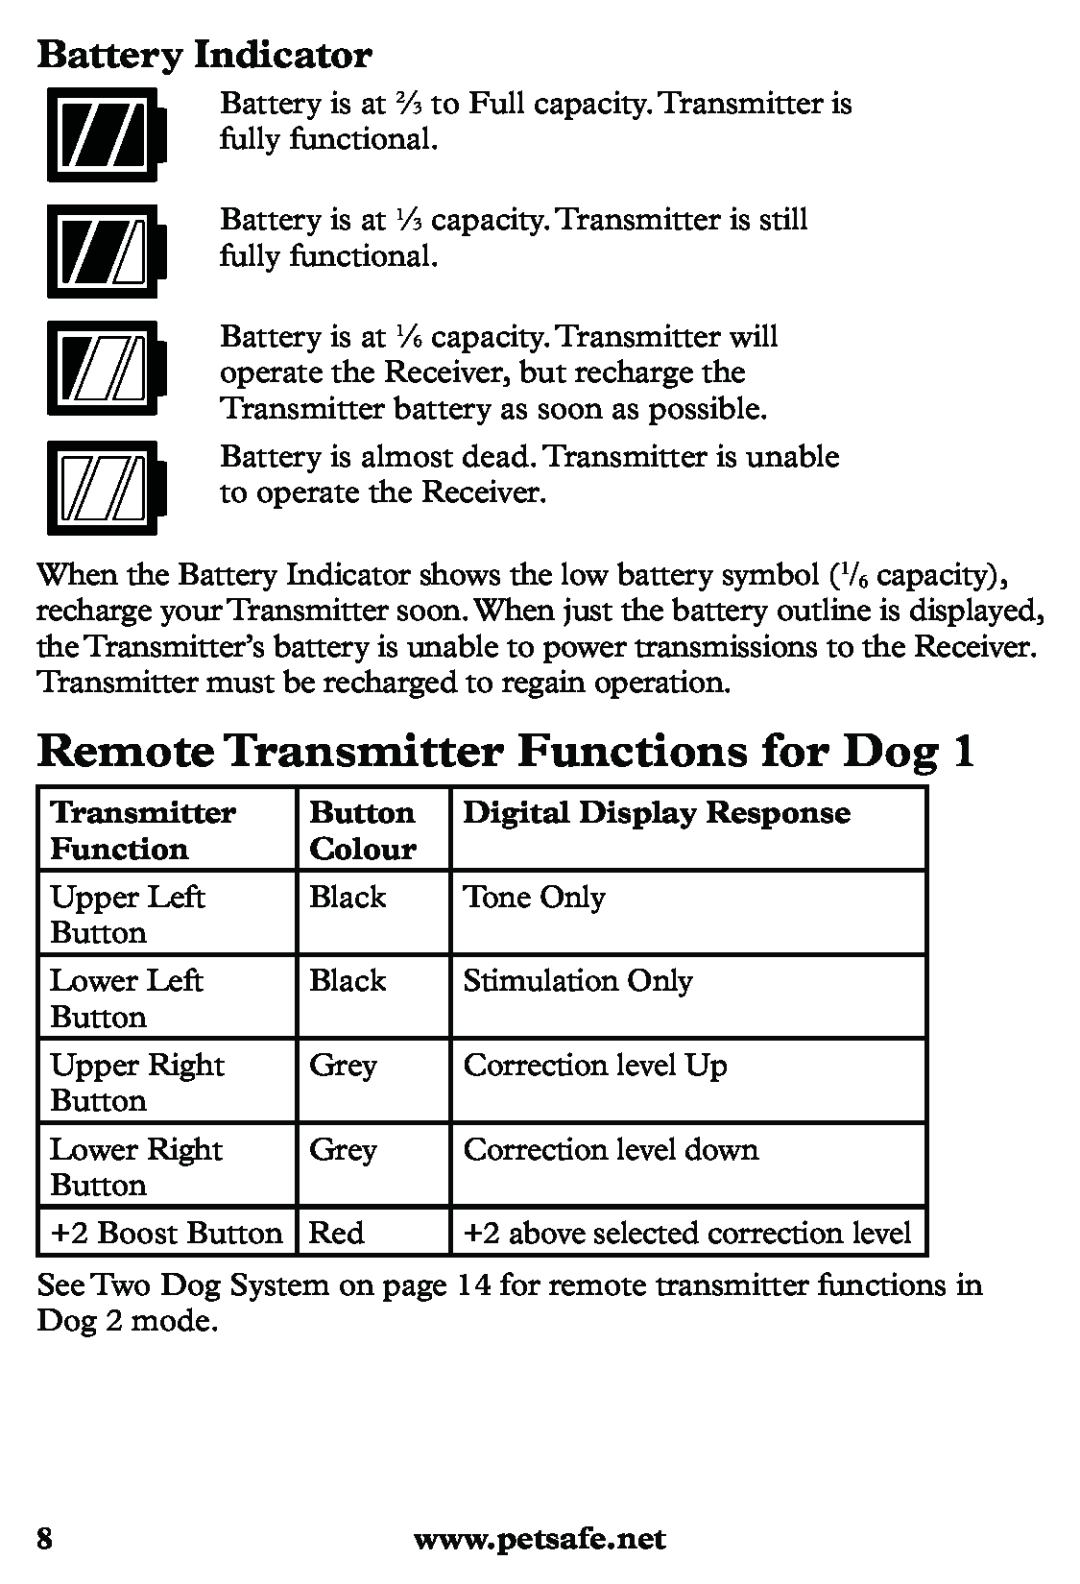 Petsafe PDT20-11939 Remote Transmitter Functions for Dog, Battery Indicator, Button, Digital Display Response, Colour 